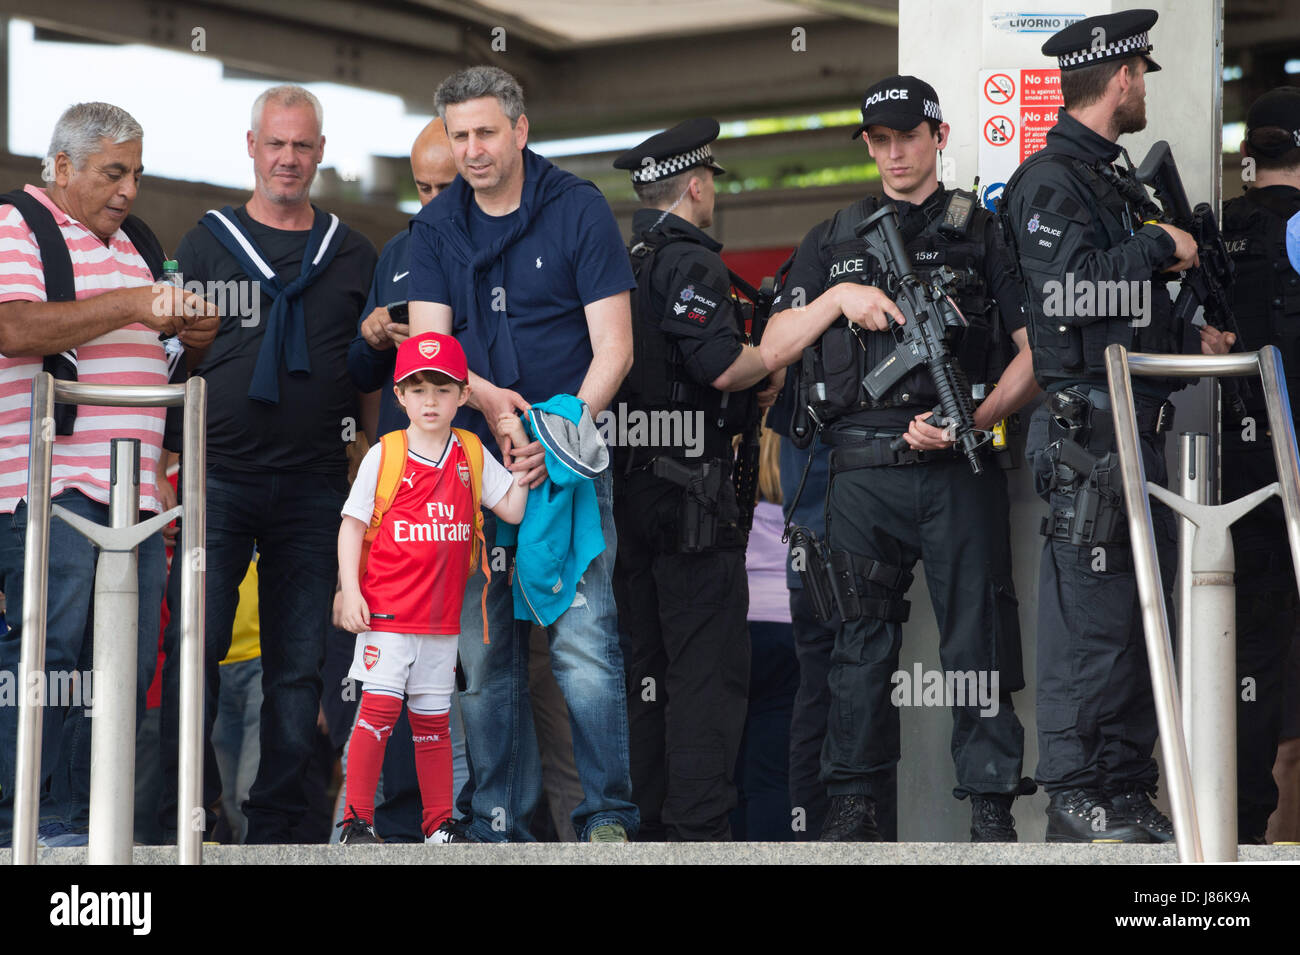 London, Britain. 27th May, 2017. Armed policemen are on patrol as security precautions are stepped up for Arsenal and Chelsea fans arriving at Wembley stadium for the FA Cup football finals in London, Britain, on May 27, 2017. The security level was in response to Manchester Arena bombing when 22 people died and 66 people were injured in one of the most deadly attacks in the UK. Credit: Ray Tang/Xinhua/Alamy Live News Stock Photo